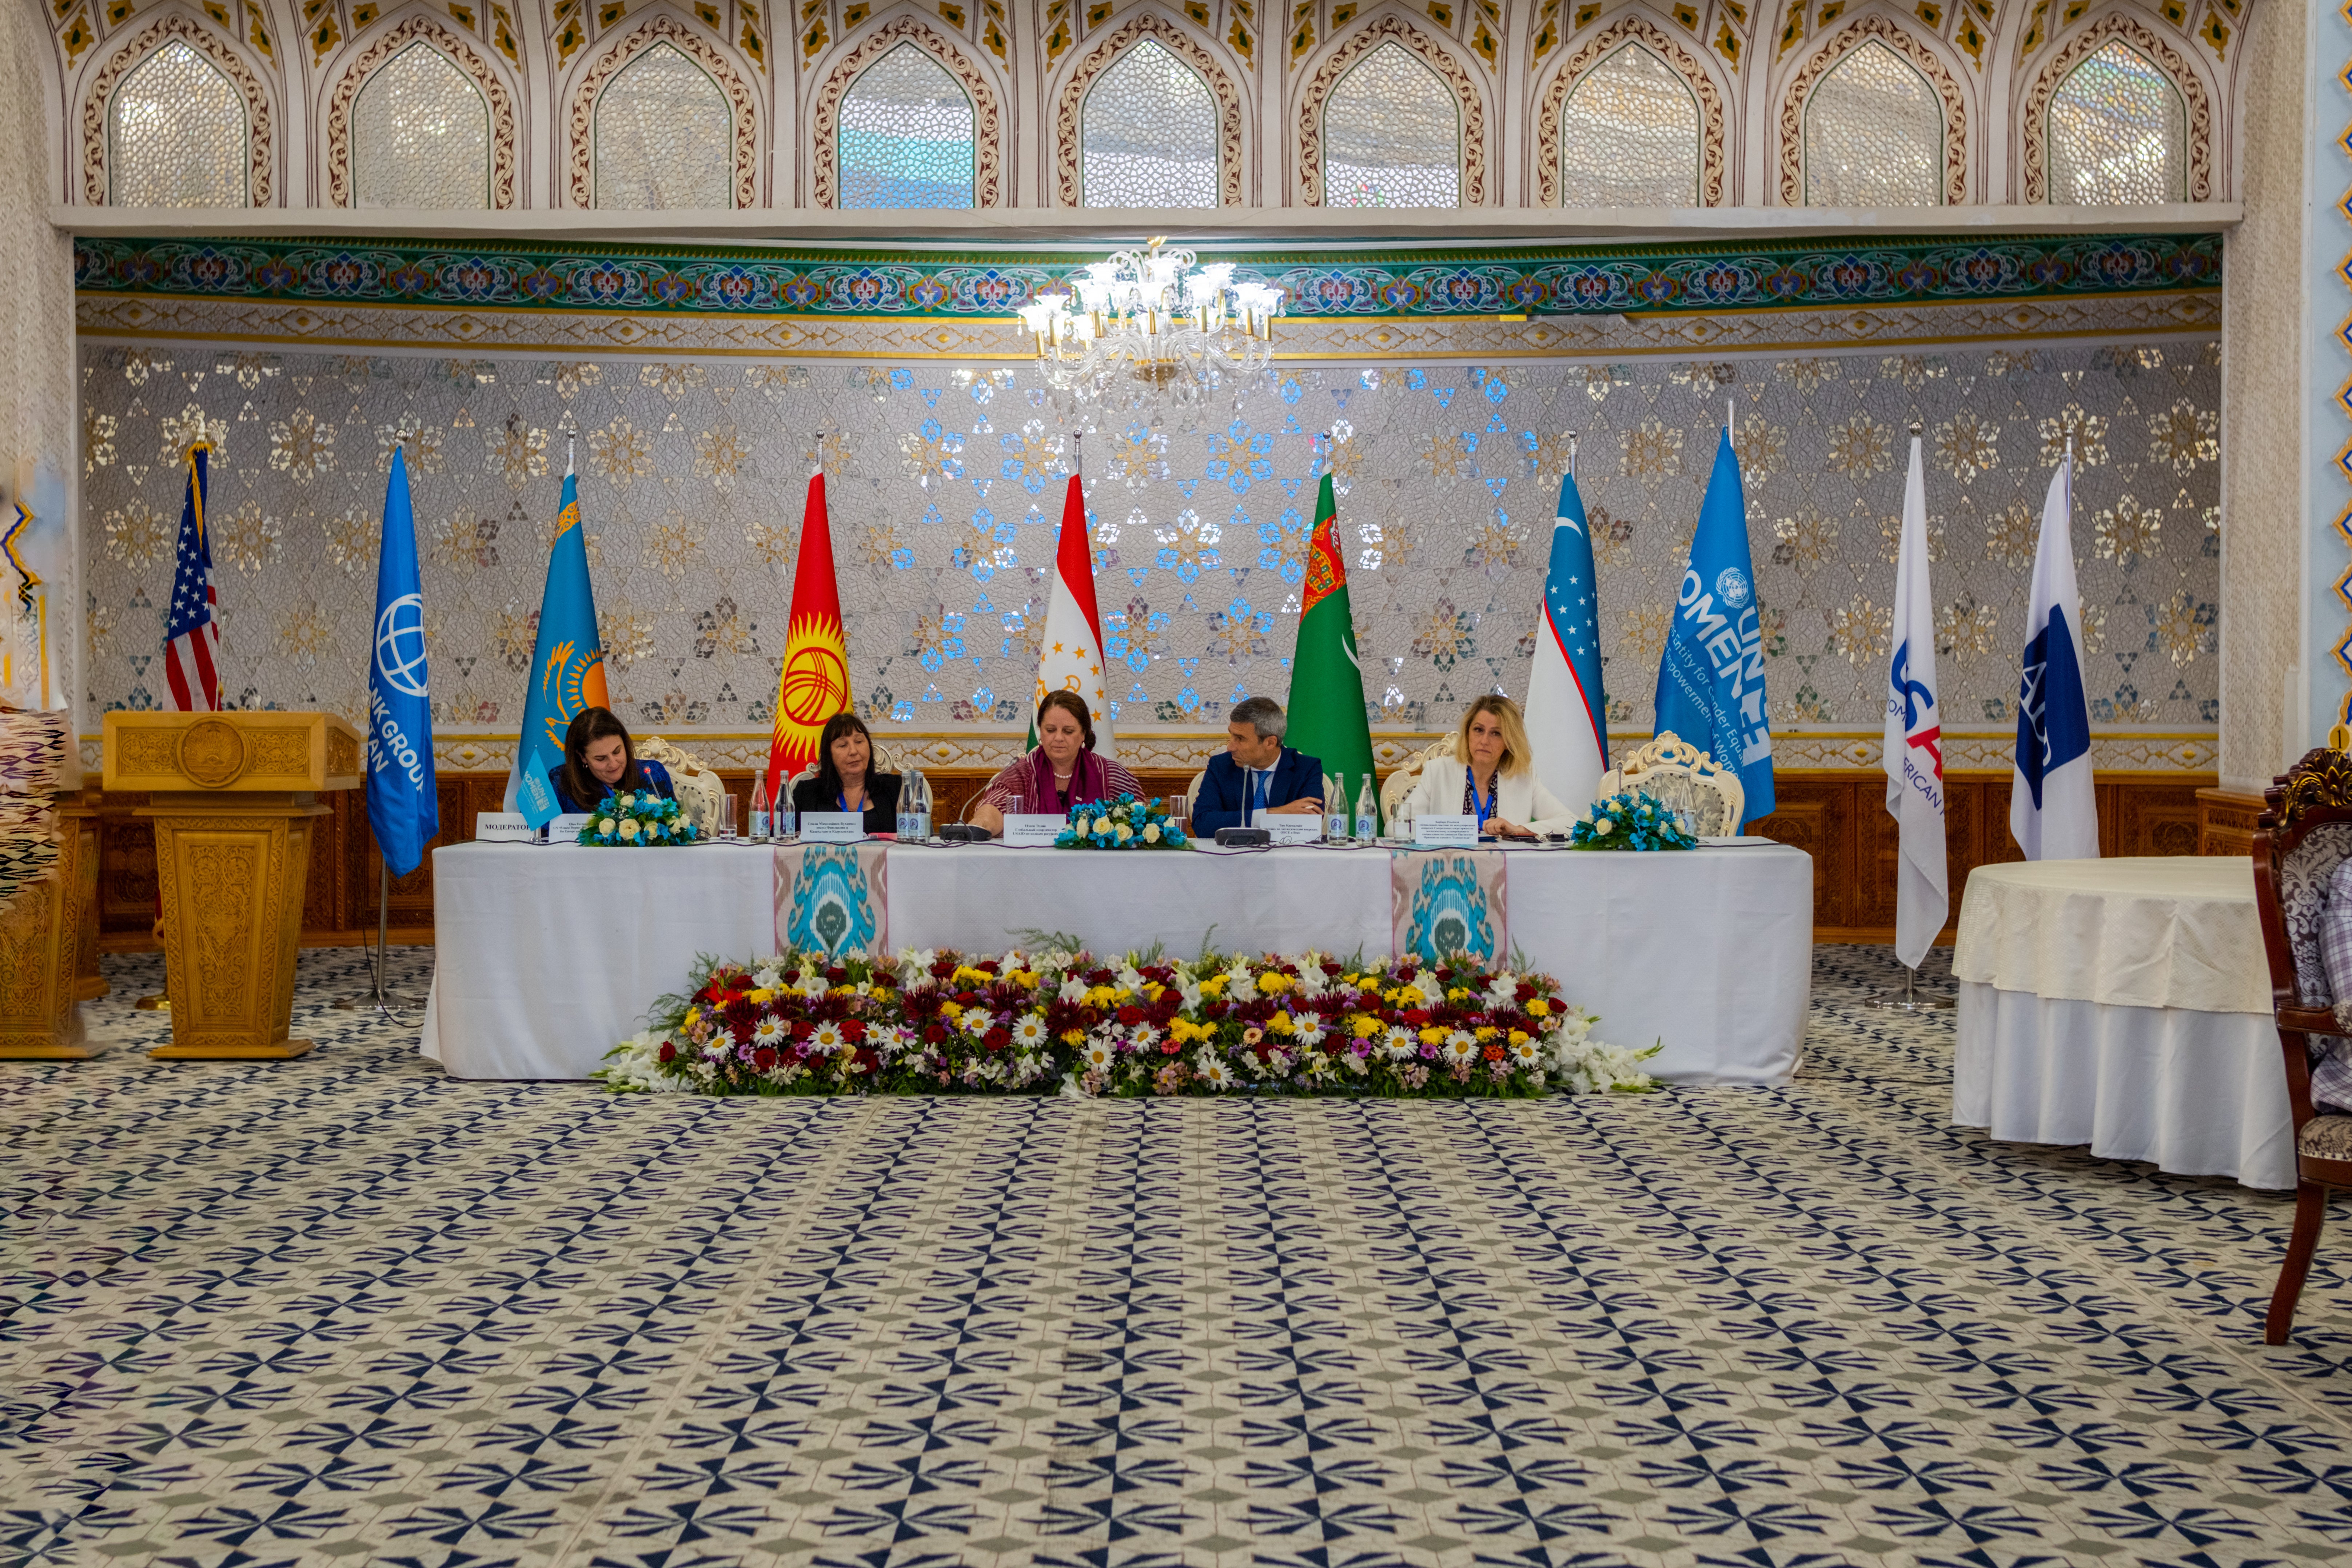 The International Forum "Women and Water" convened 120 partners from 17 countries and various sectors in Dushanbe, Tajikistan to highlight the pivotal role of women in water governance and management and their empowerment in decision-making processes. Photo: UN Women